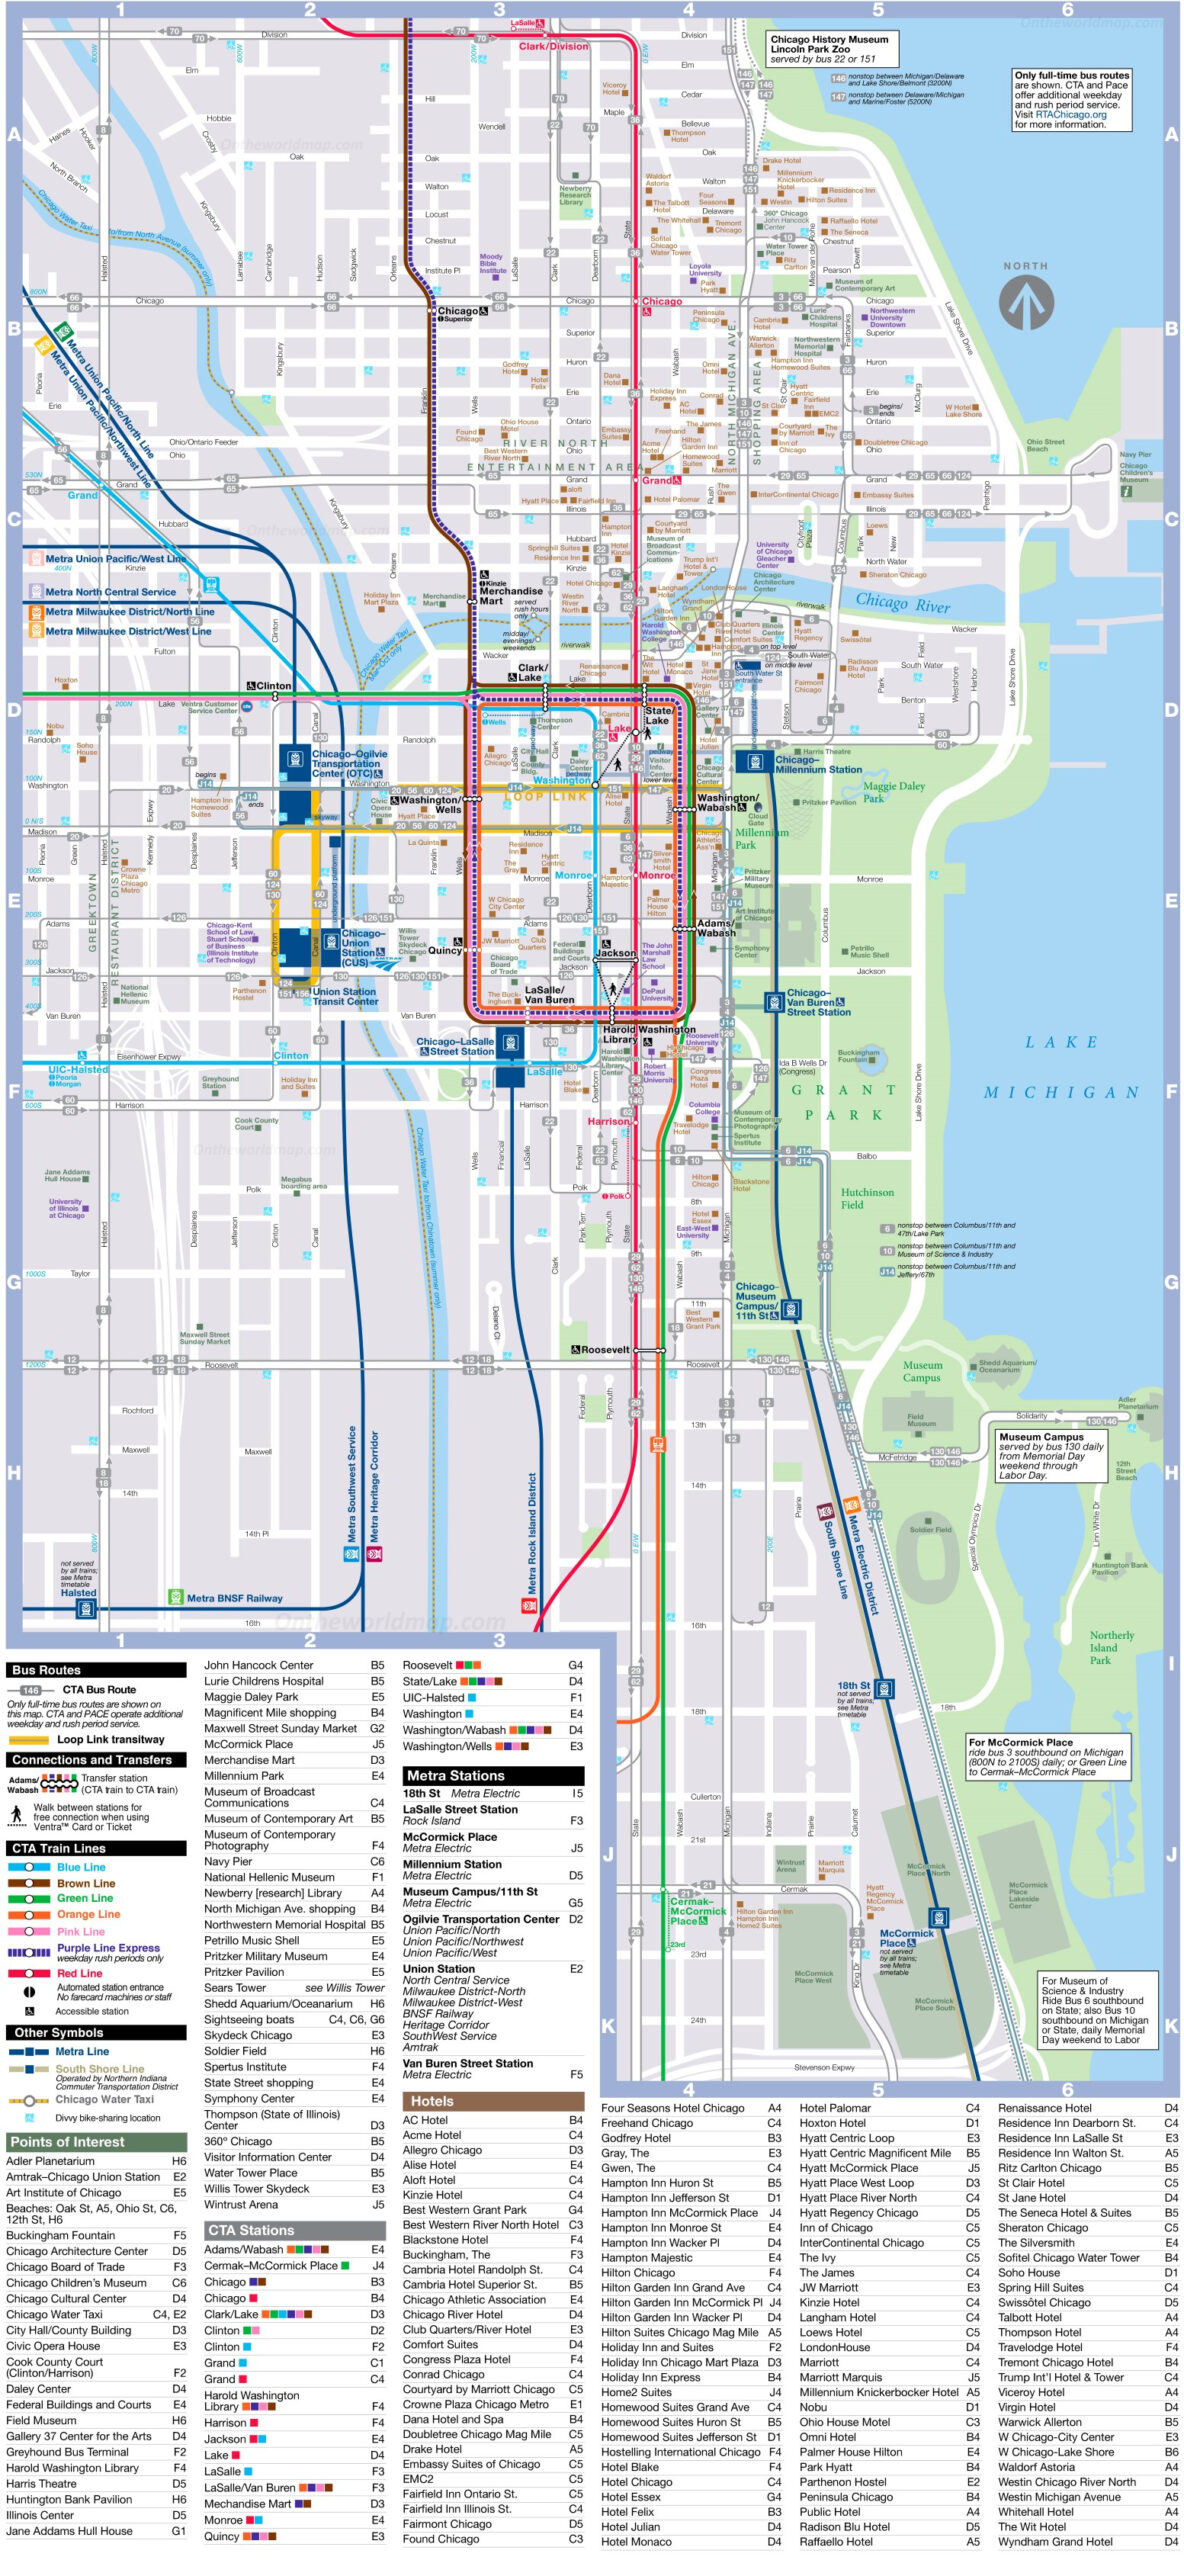 Chicago Loop Transport And Sightseeings Map